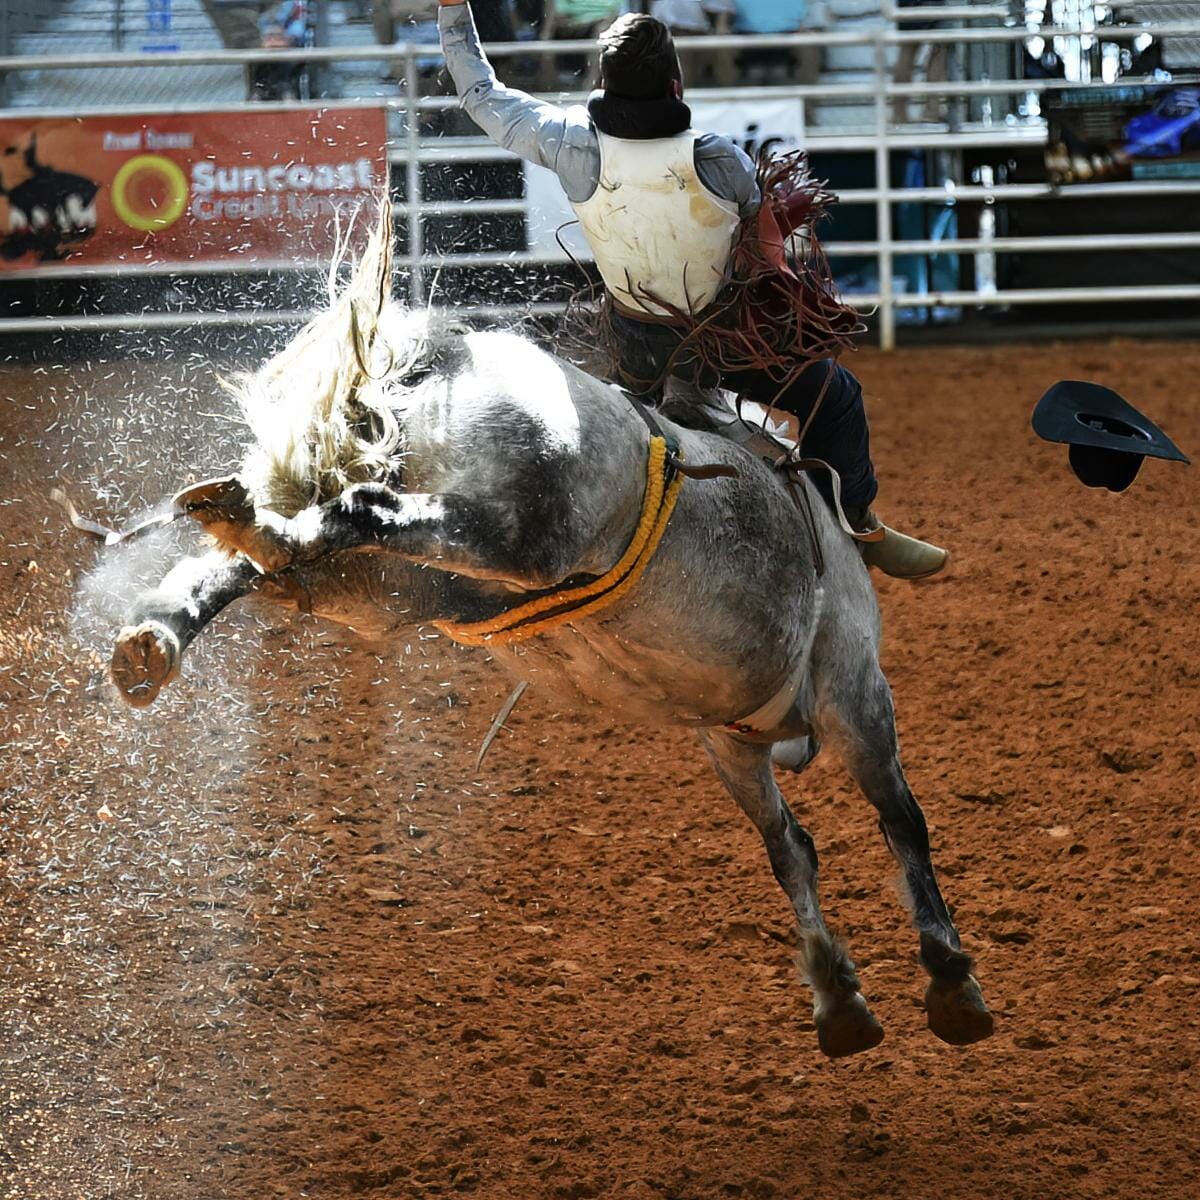 Photographing The Arcadia-All Florida Championship Rodeo!